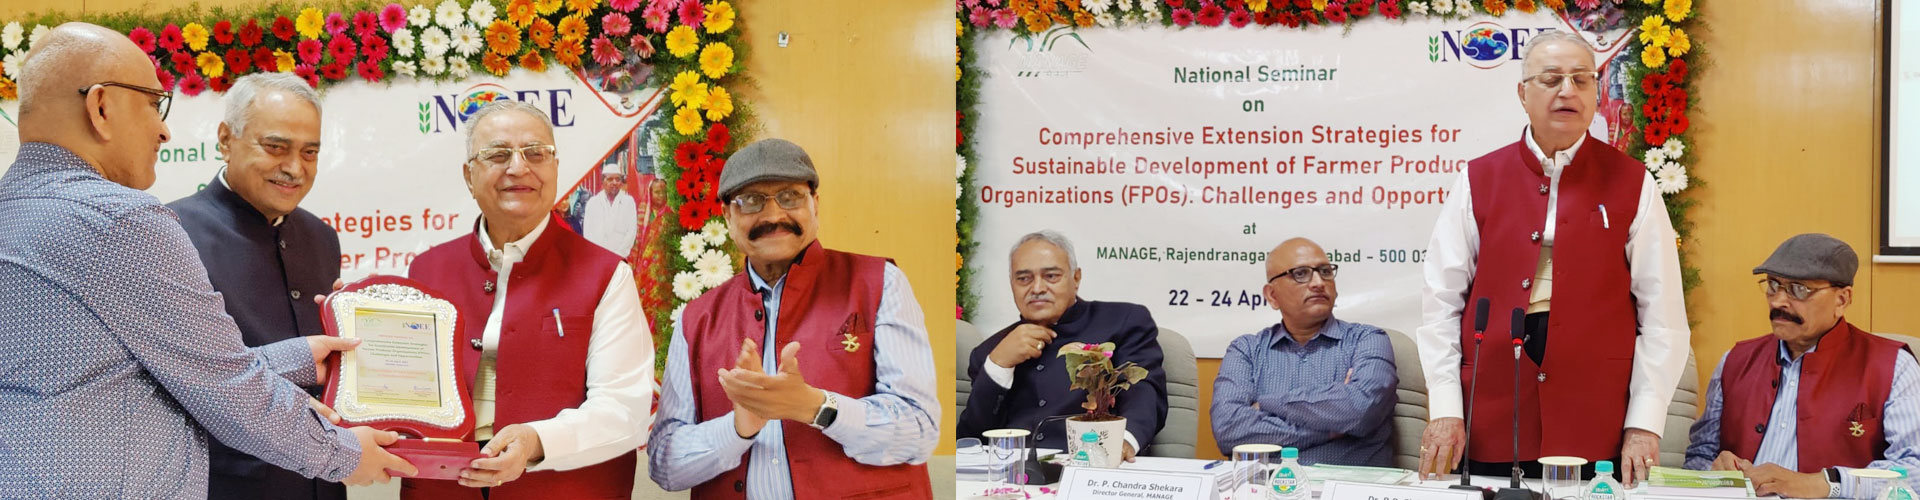 National Seminar on Comprehensive Extension Strategies for Sustainable Development of Farmer Producer Organization (FPOs)